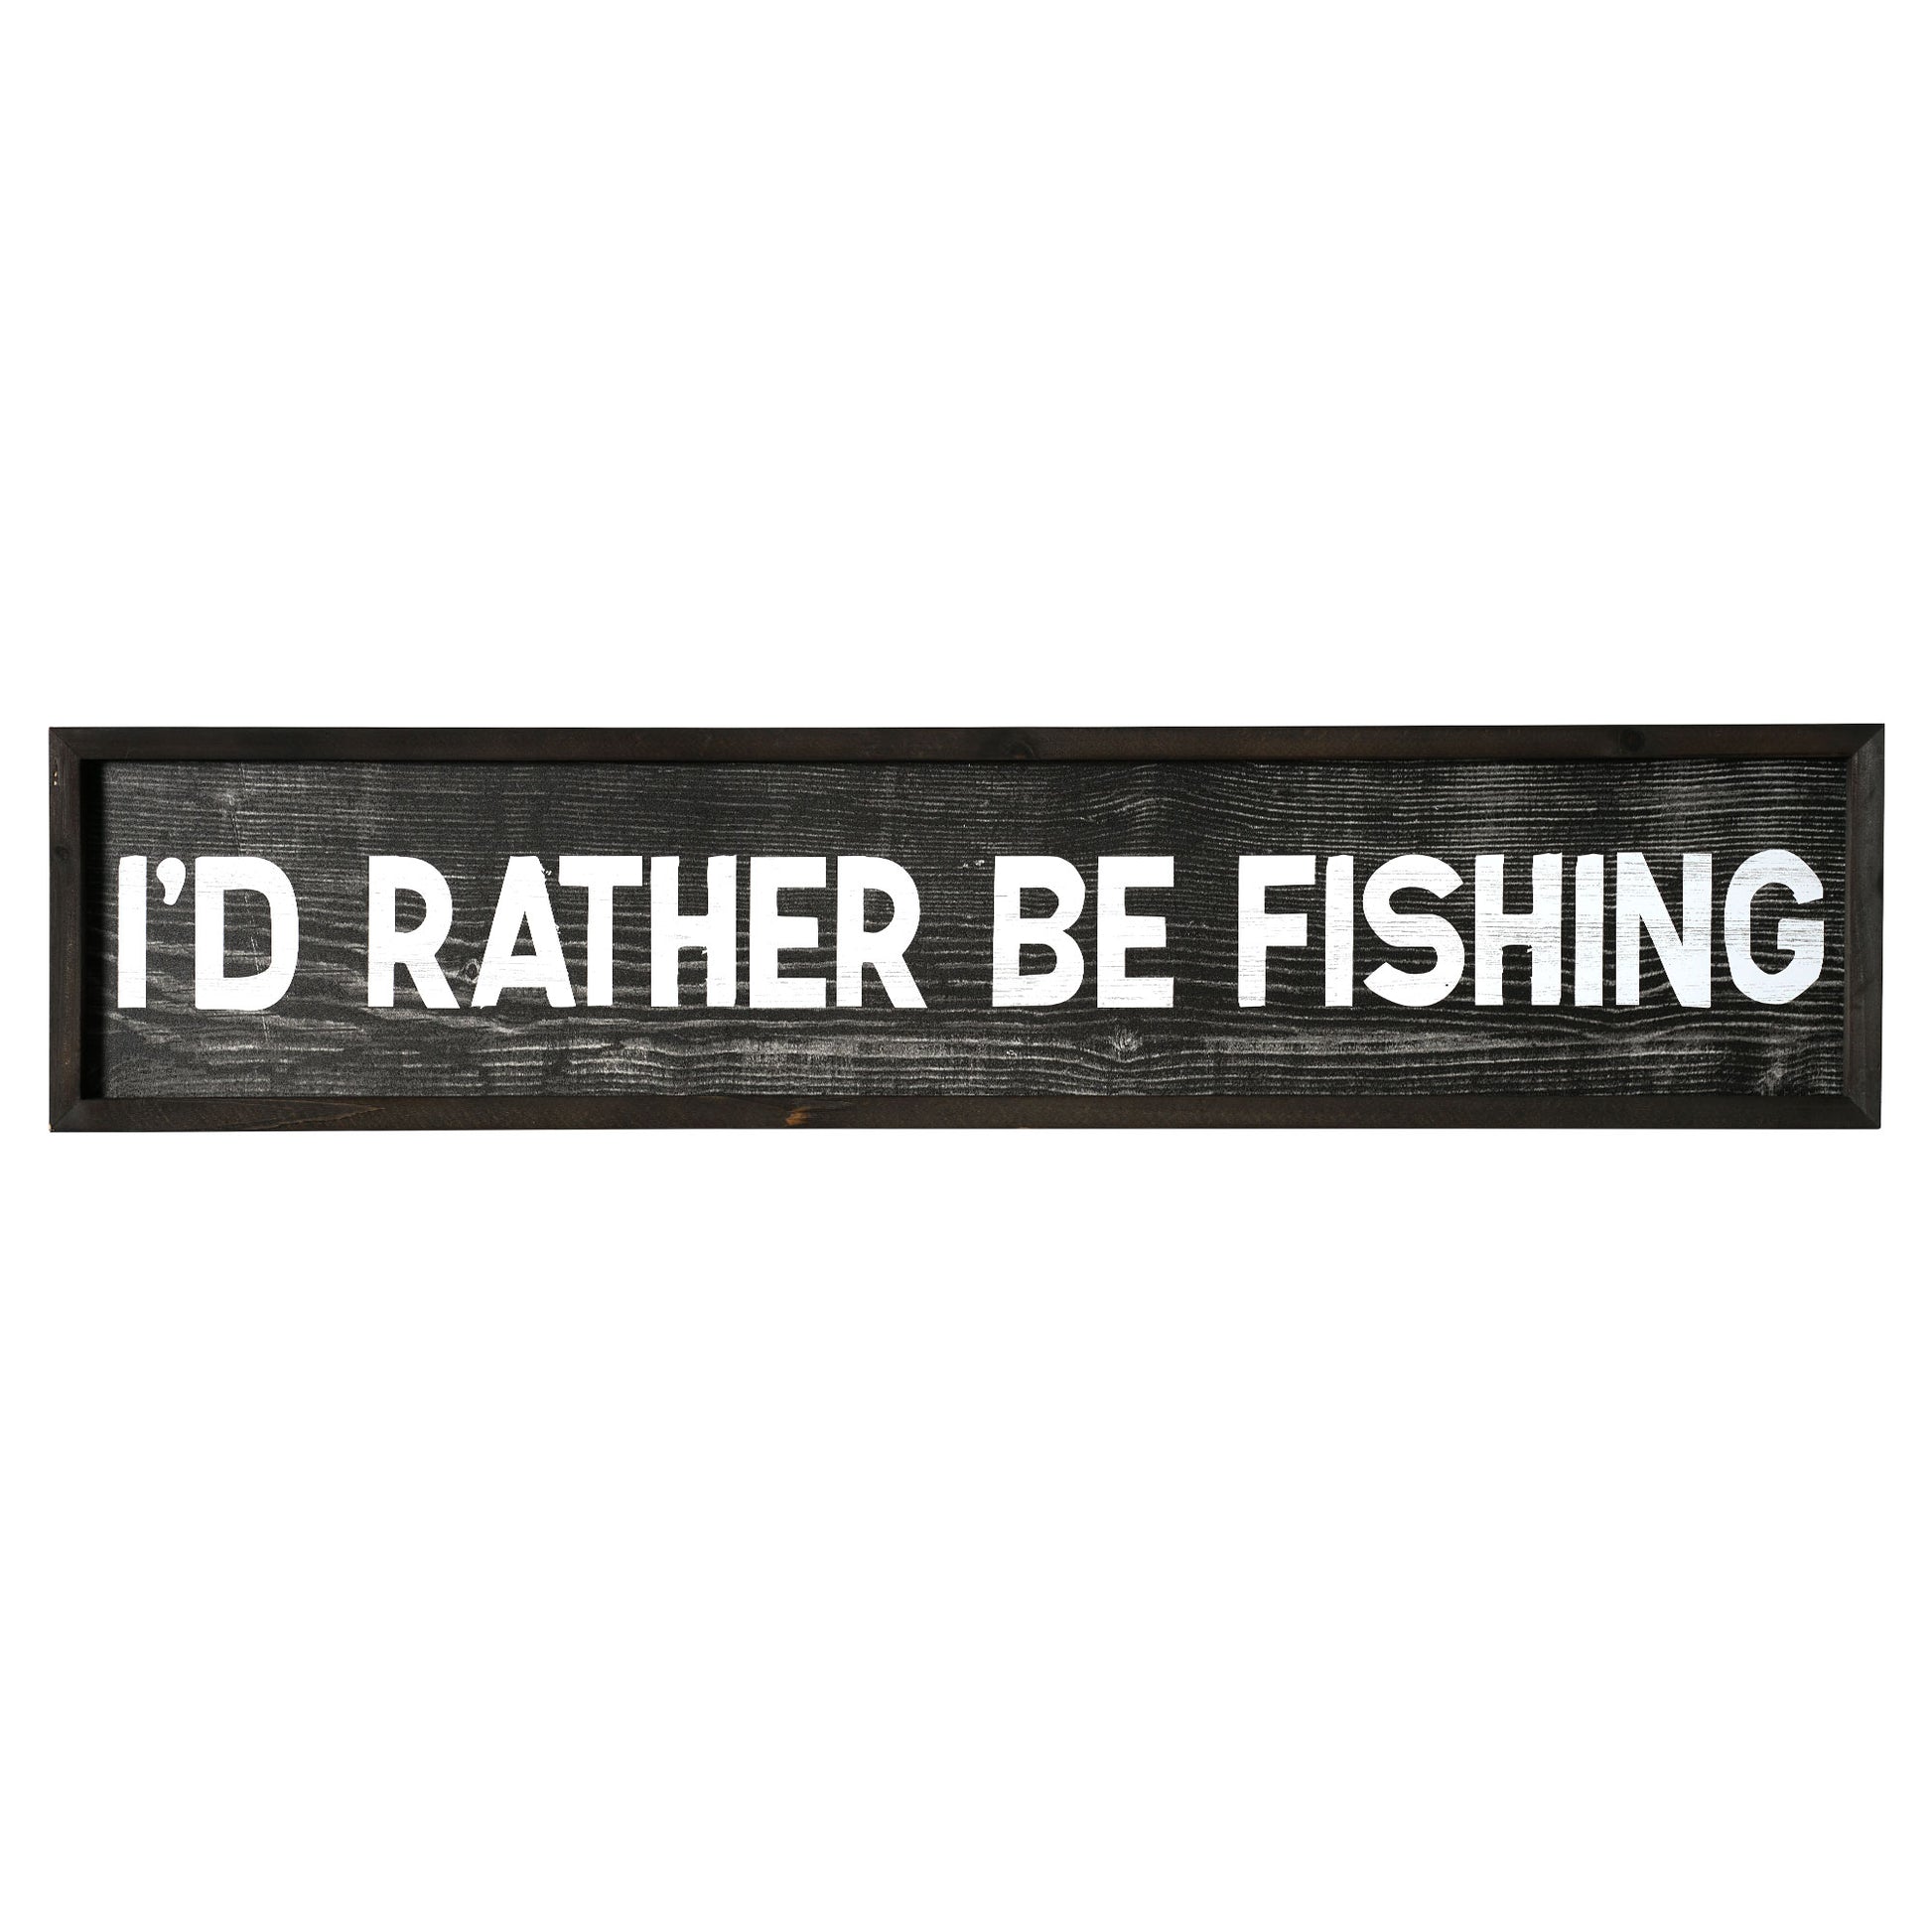 I'd Rather Be Fishing Wood Novelty Wall Sign - 36 x 8